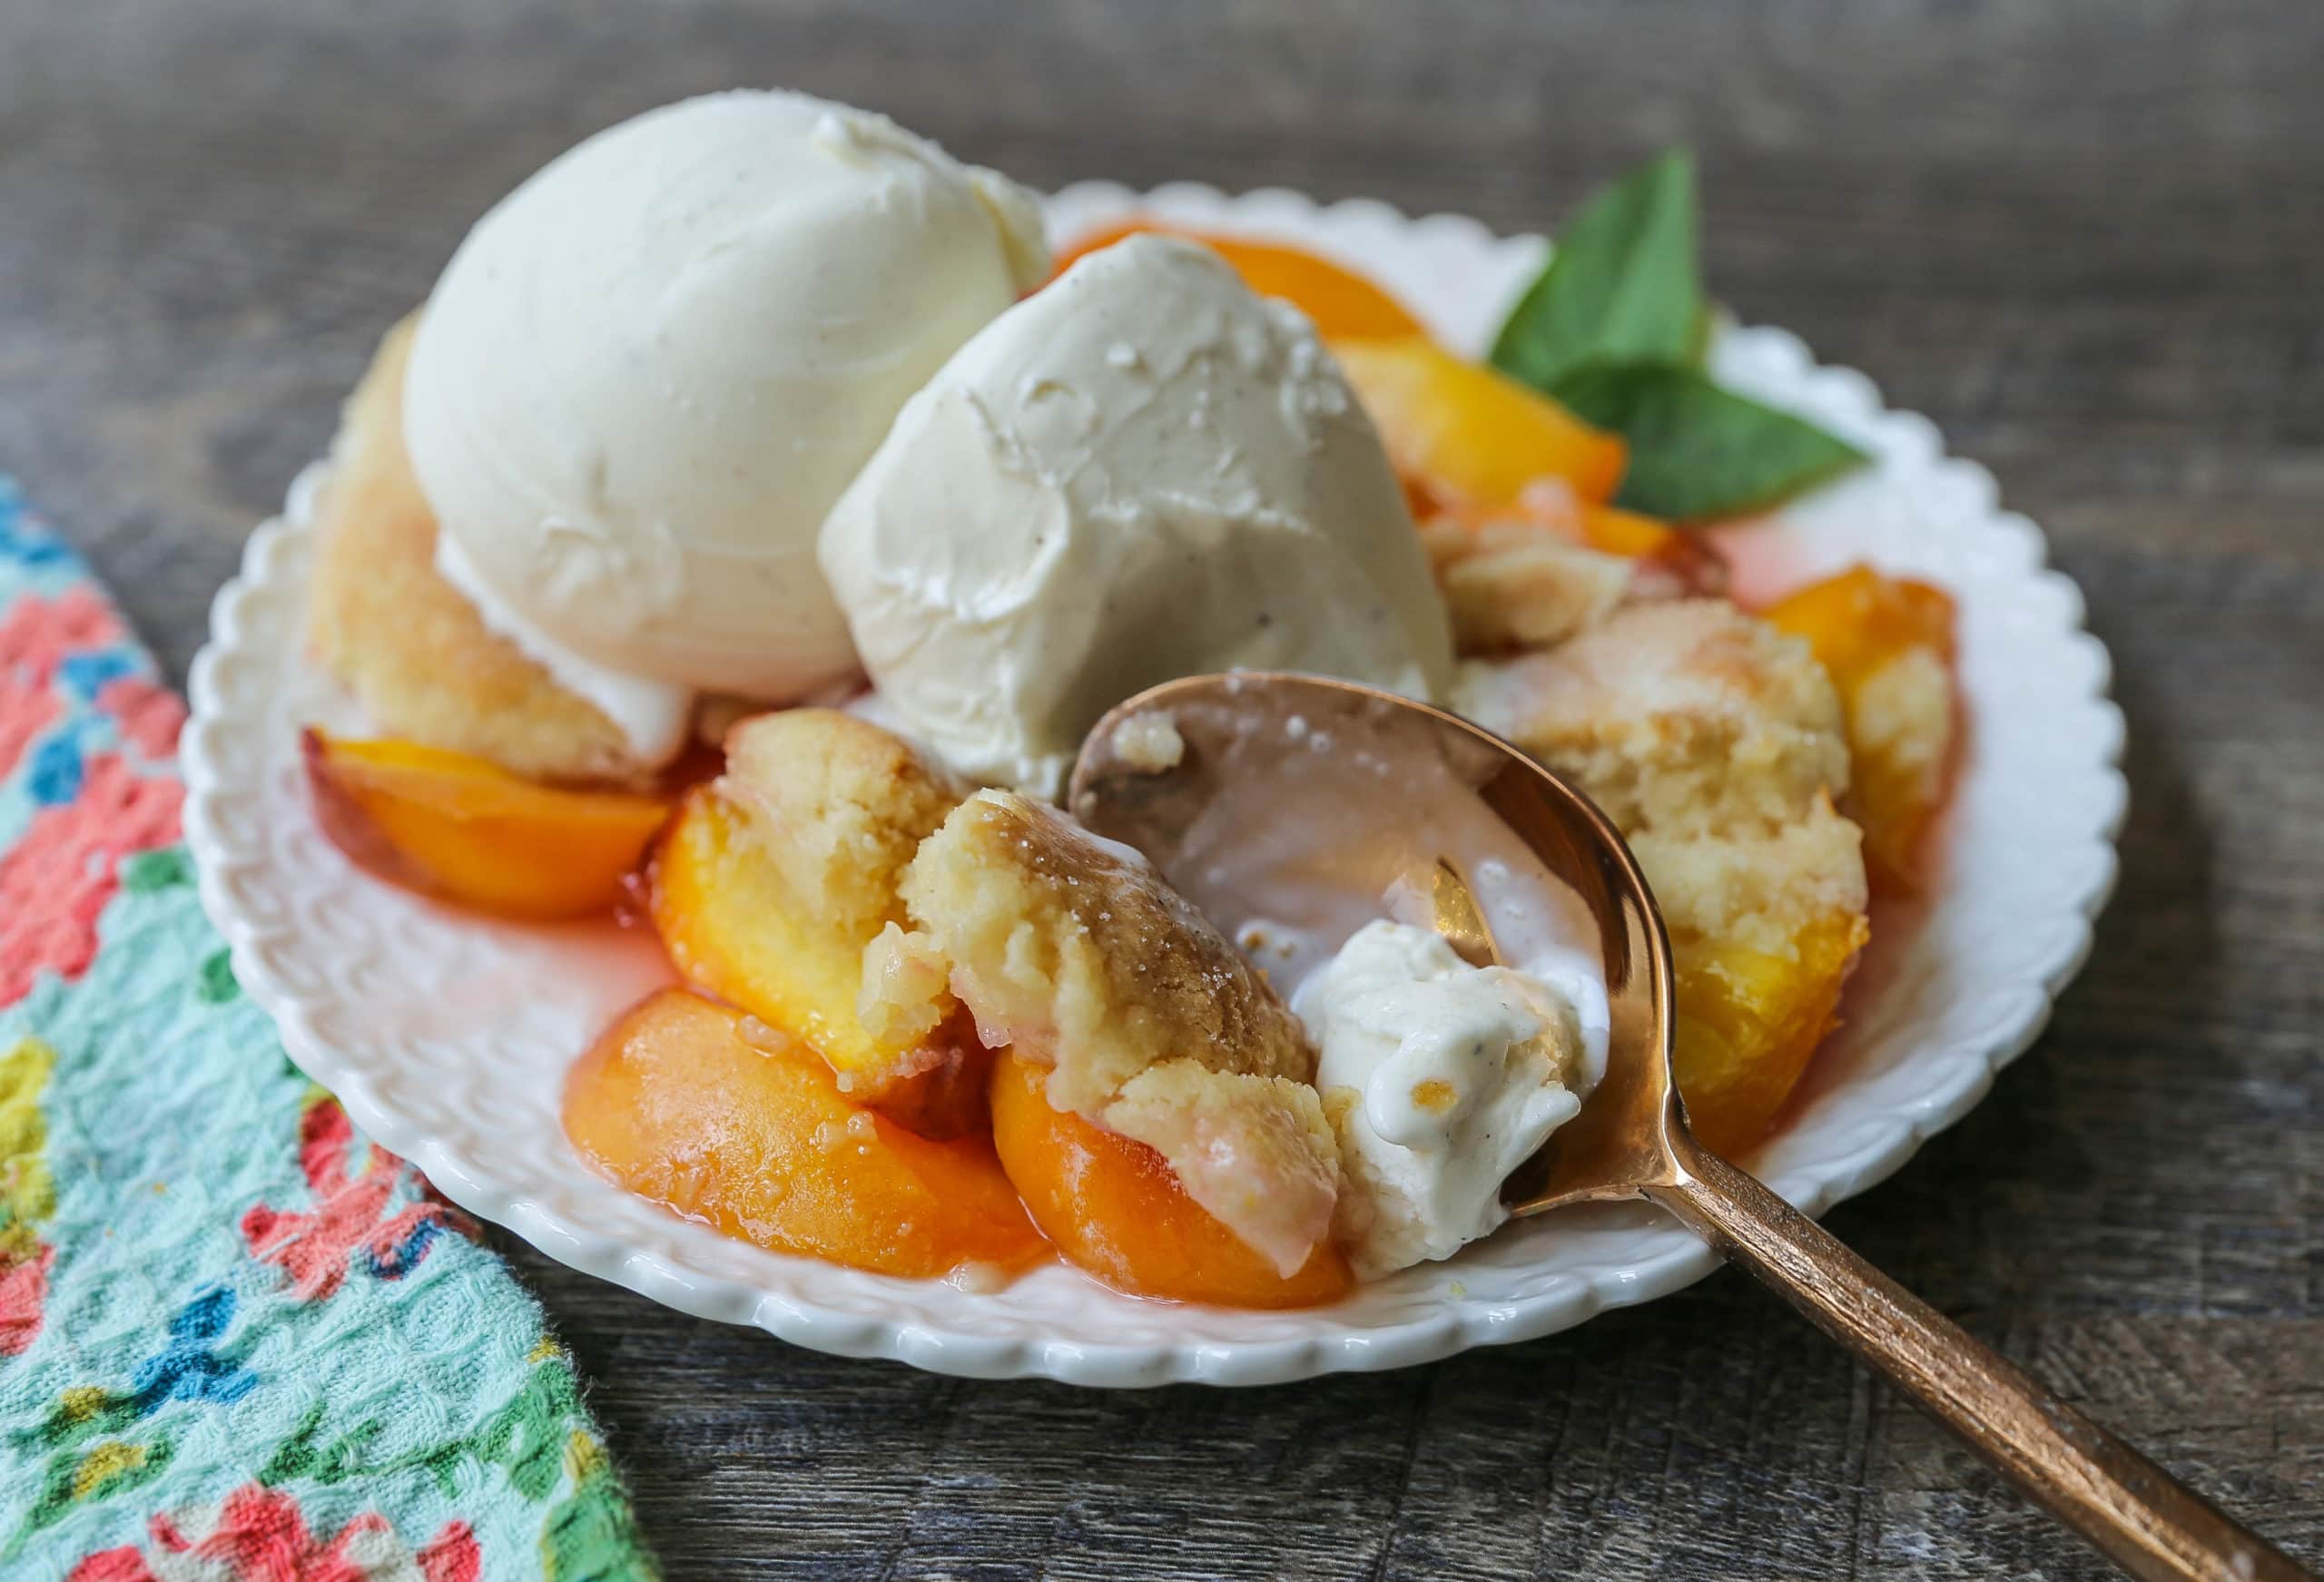 Peach Cobbler. The Best Peach Cobbler Recipe! Fresh peaches tossed with a touch of sugar and topped with a homemade sweet and buttery topping that resembles a mix of a sugar cookie and a sweet biscuit. 